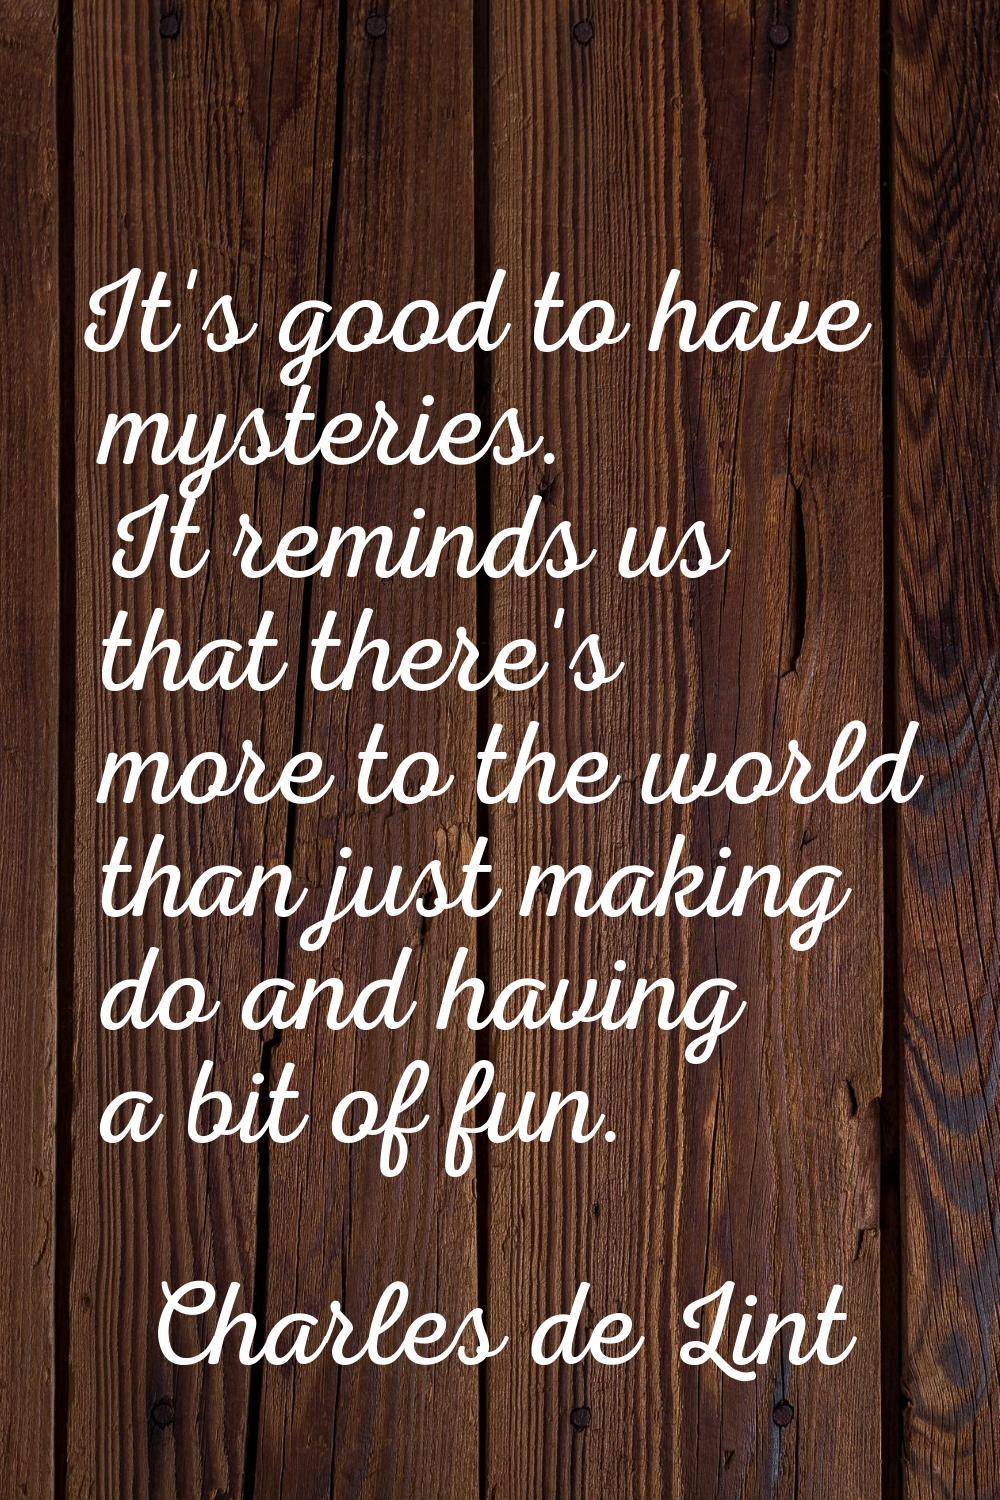 It's good to have mysteries. It reminds us that there's more to the world than just making do and h